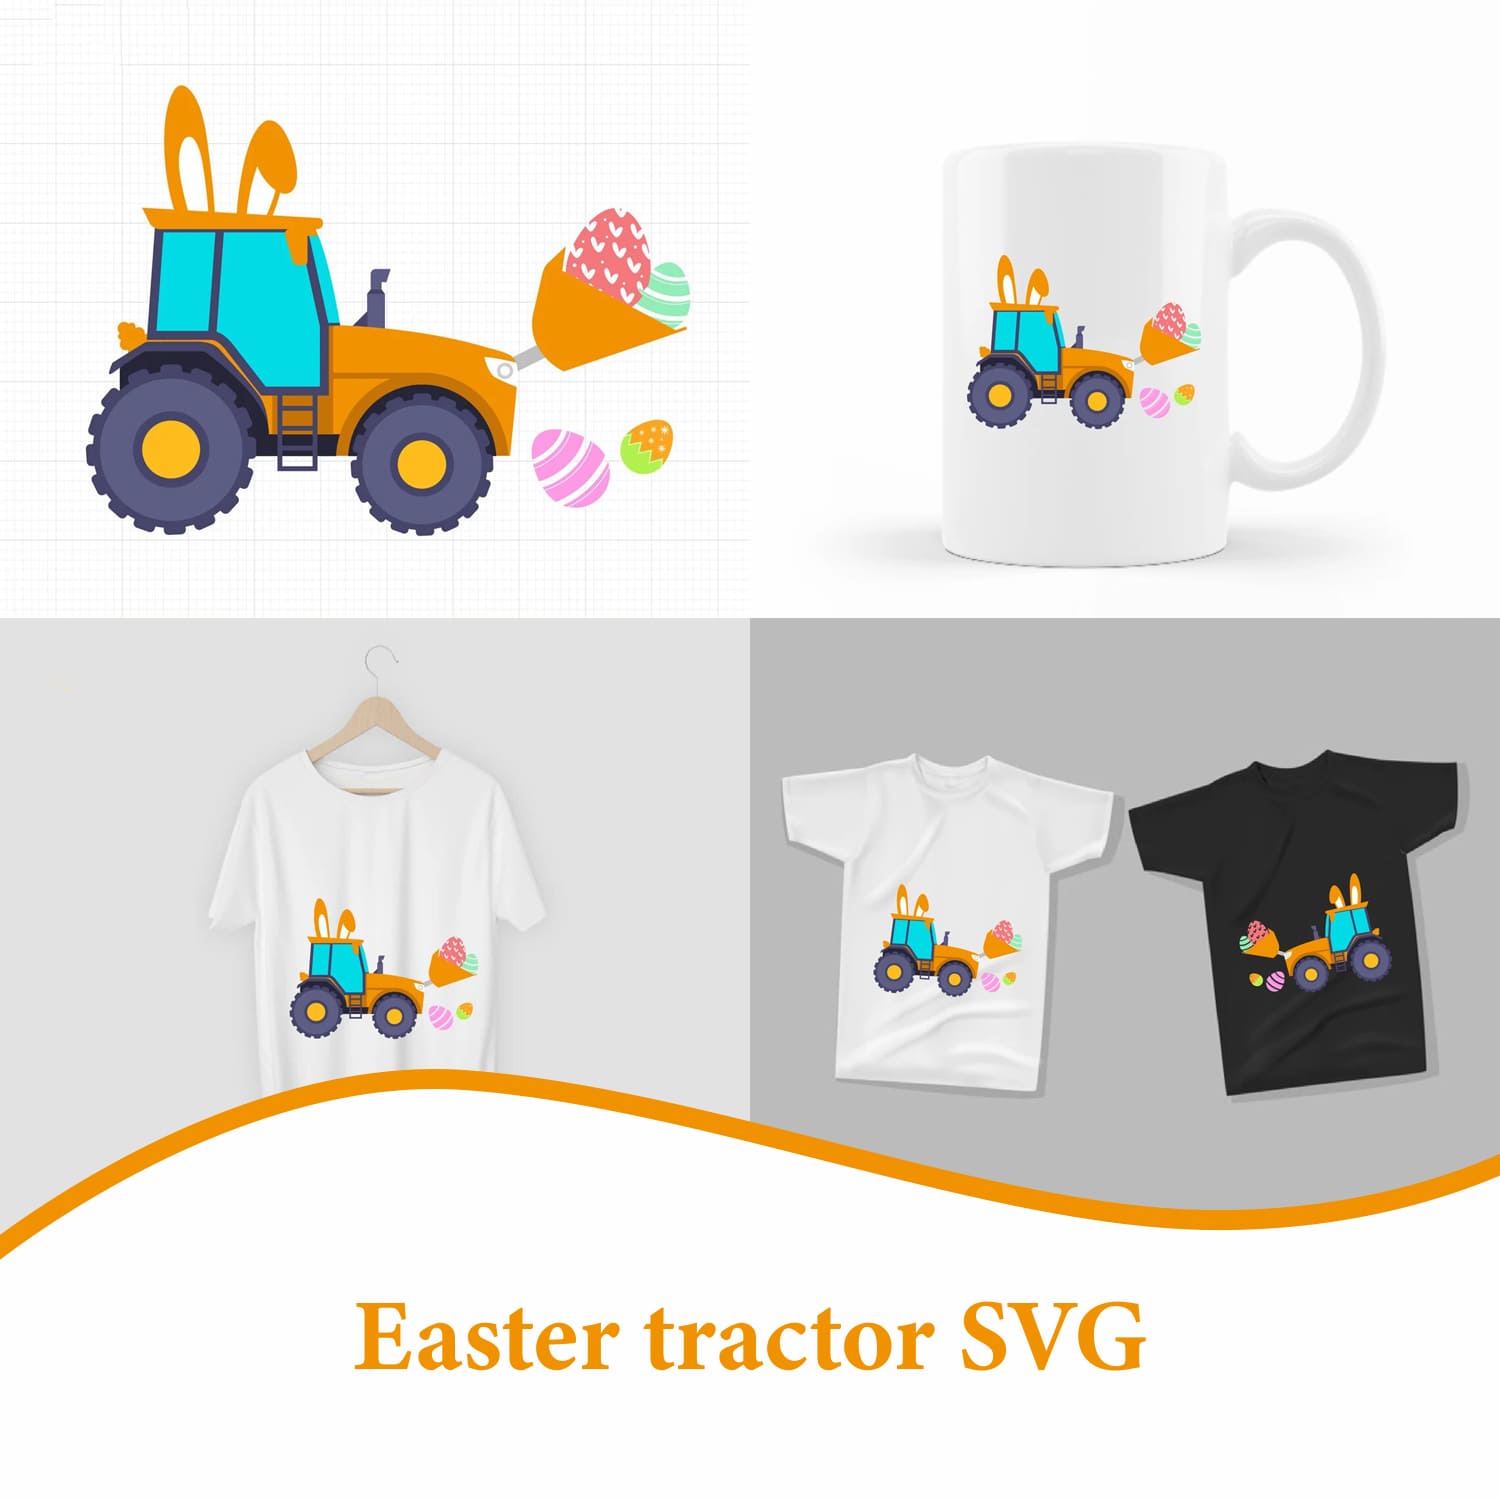 easter tractor svg for design ideas.